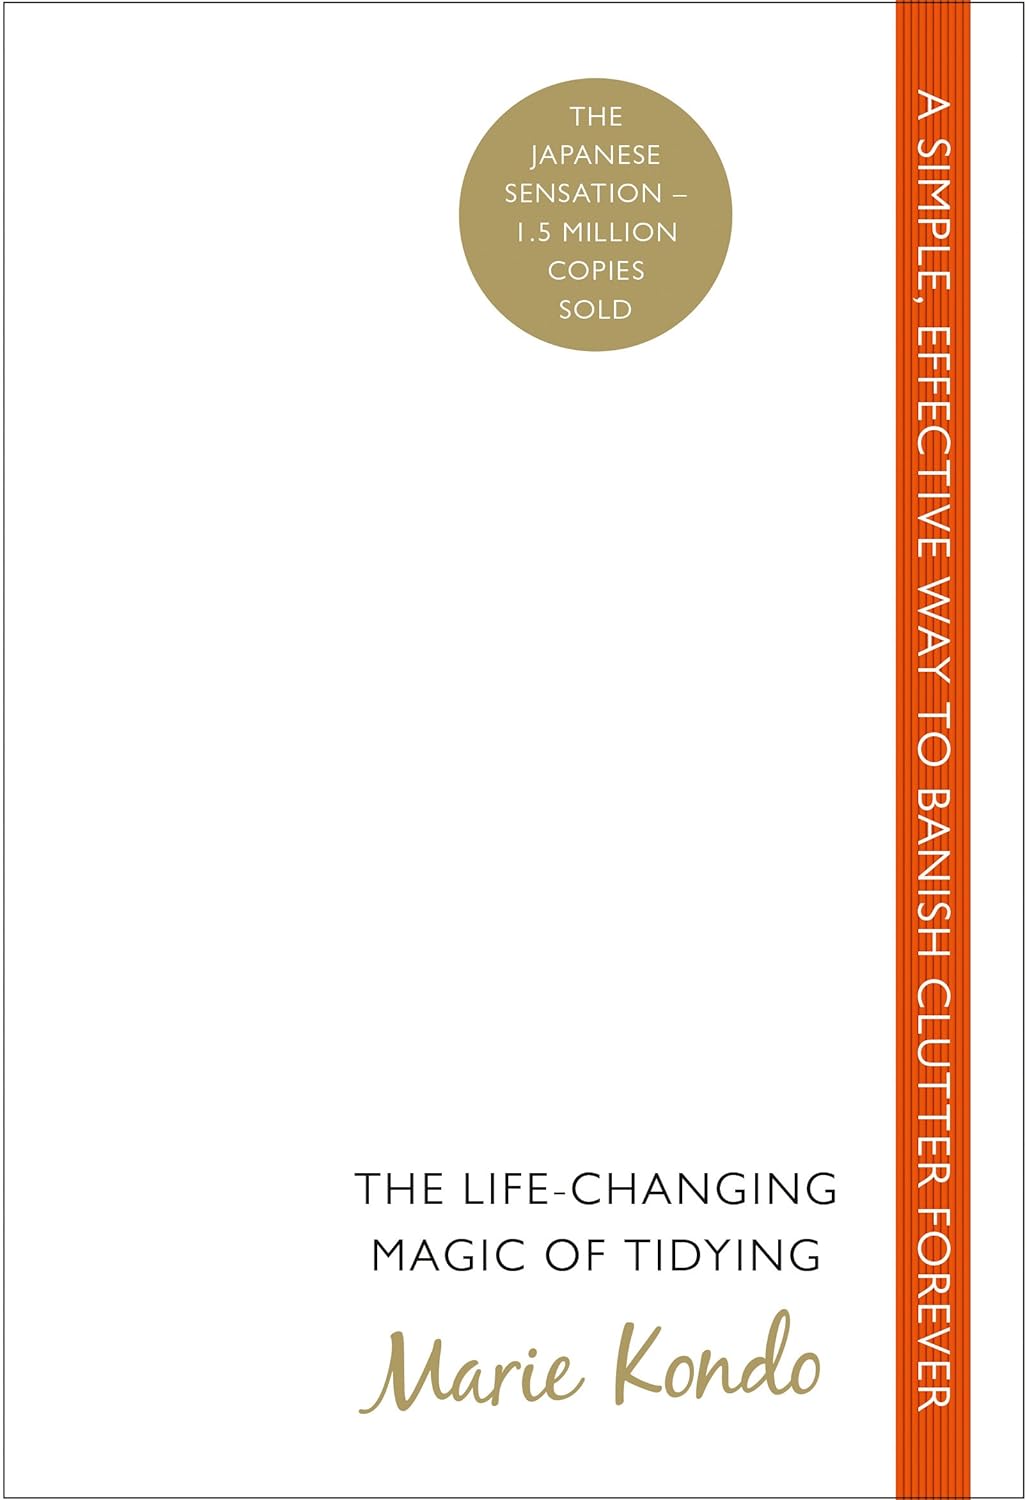 The Life-Changing Magic of Tidying Up The Japanese Art of Decluttering and Organizing by Marie Kondo (2010)